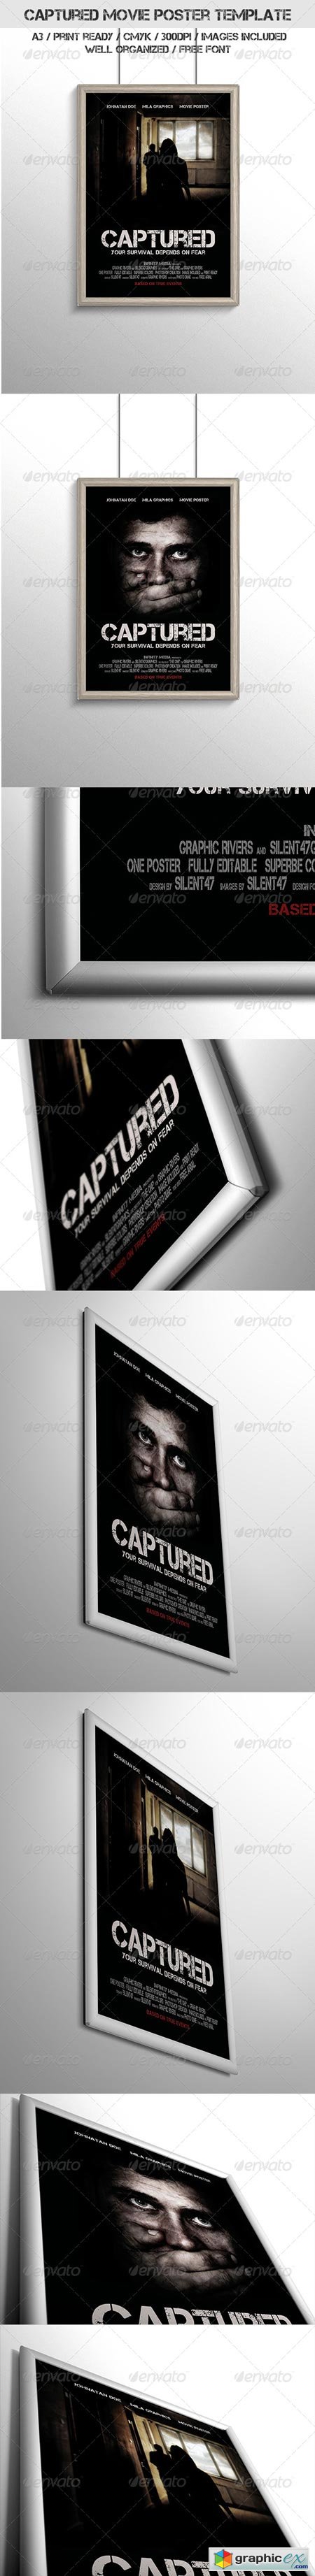 Captured Movie Poster Template 6783007